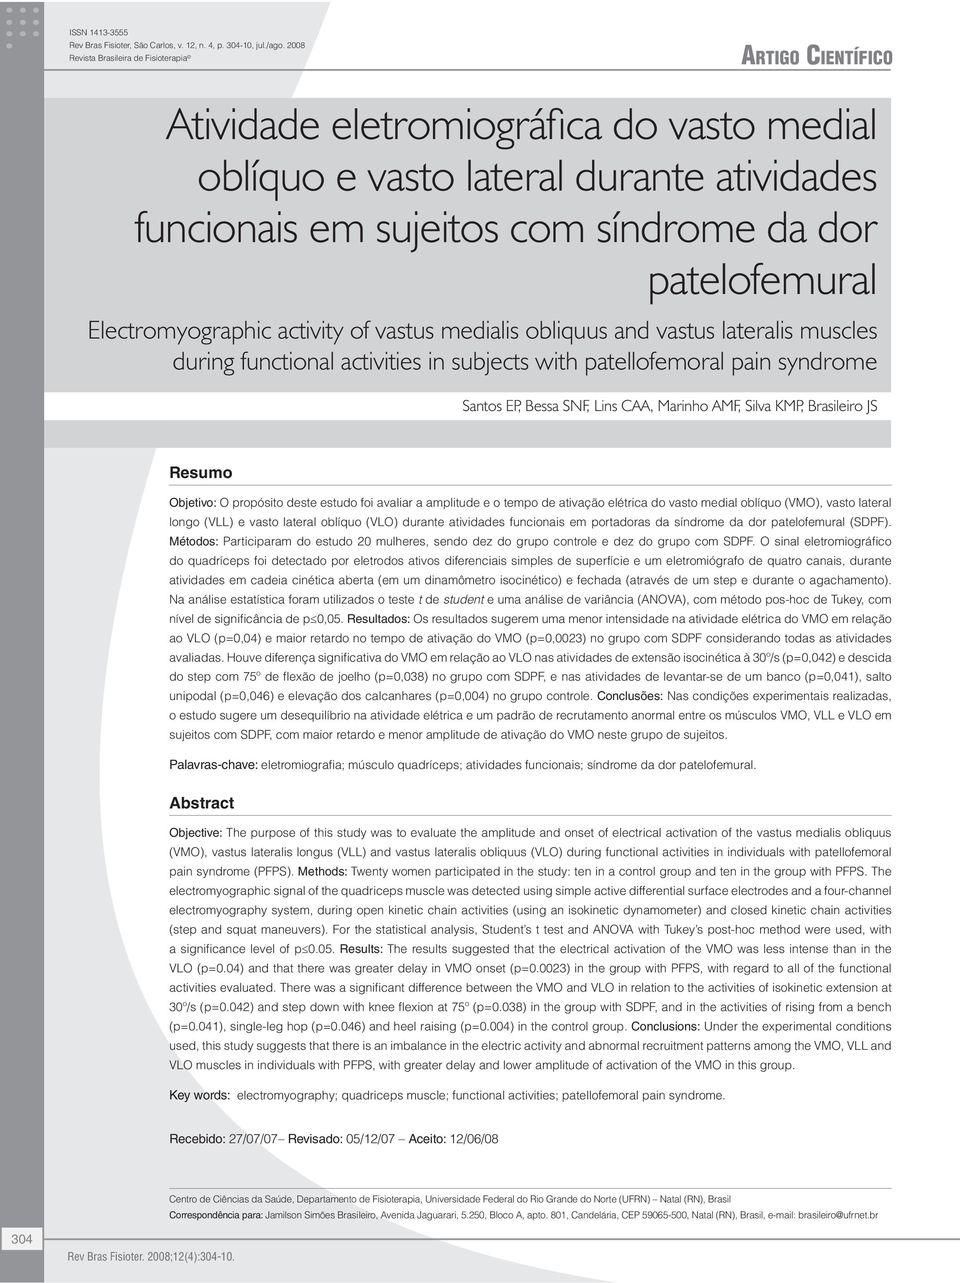 Electromyographic activity of vastus medialis obliquus and vastus lateralis muscles during functional activities in subjects with patellofemoral pain syndrome Santos EP, Bessa SNF, Lins CAA, Marinho